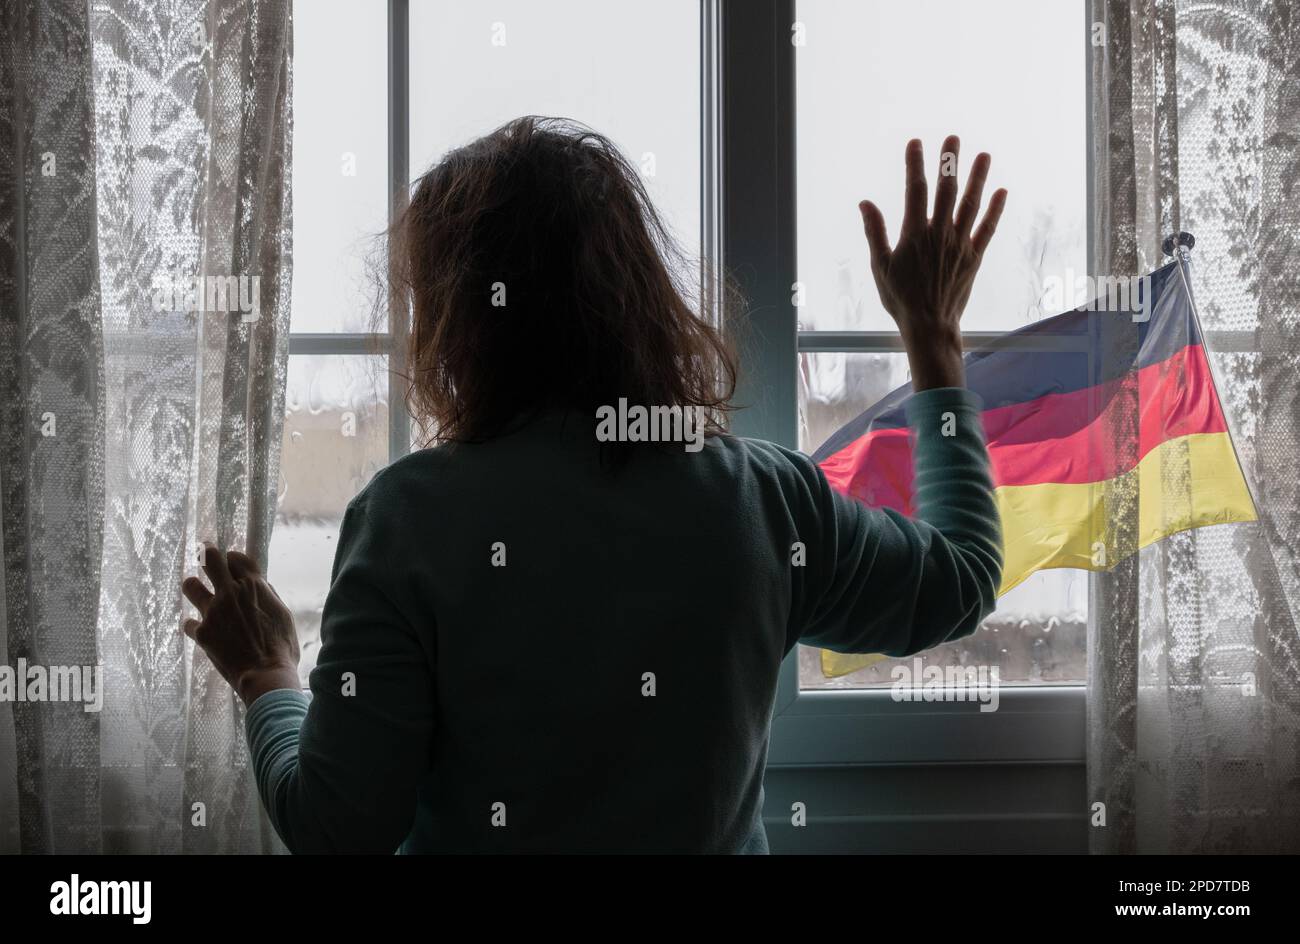 Woman looking out of window on rainy day. Flag of Germany outside. Concept: depression, domestic abuse, mental health, human trafficking, slavery... Stock Photo